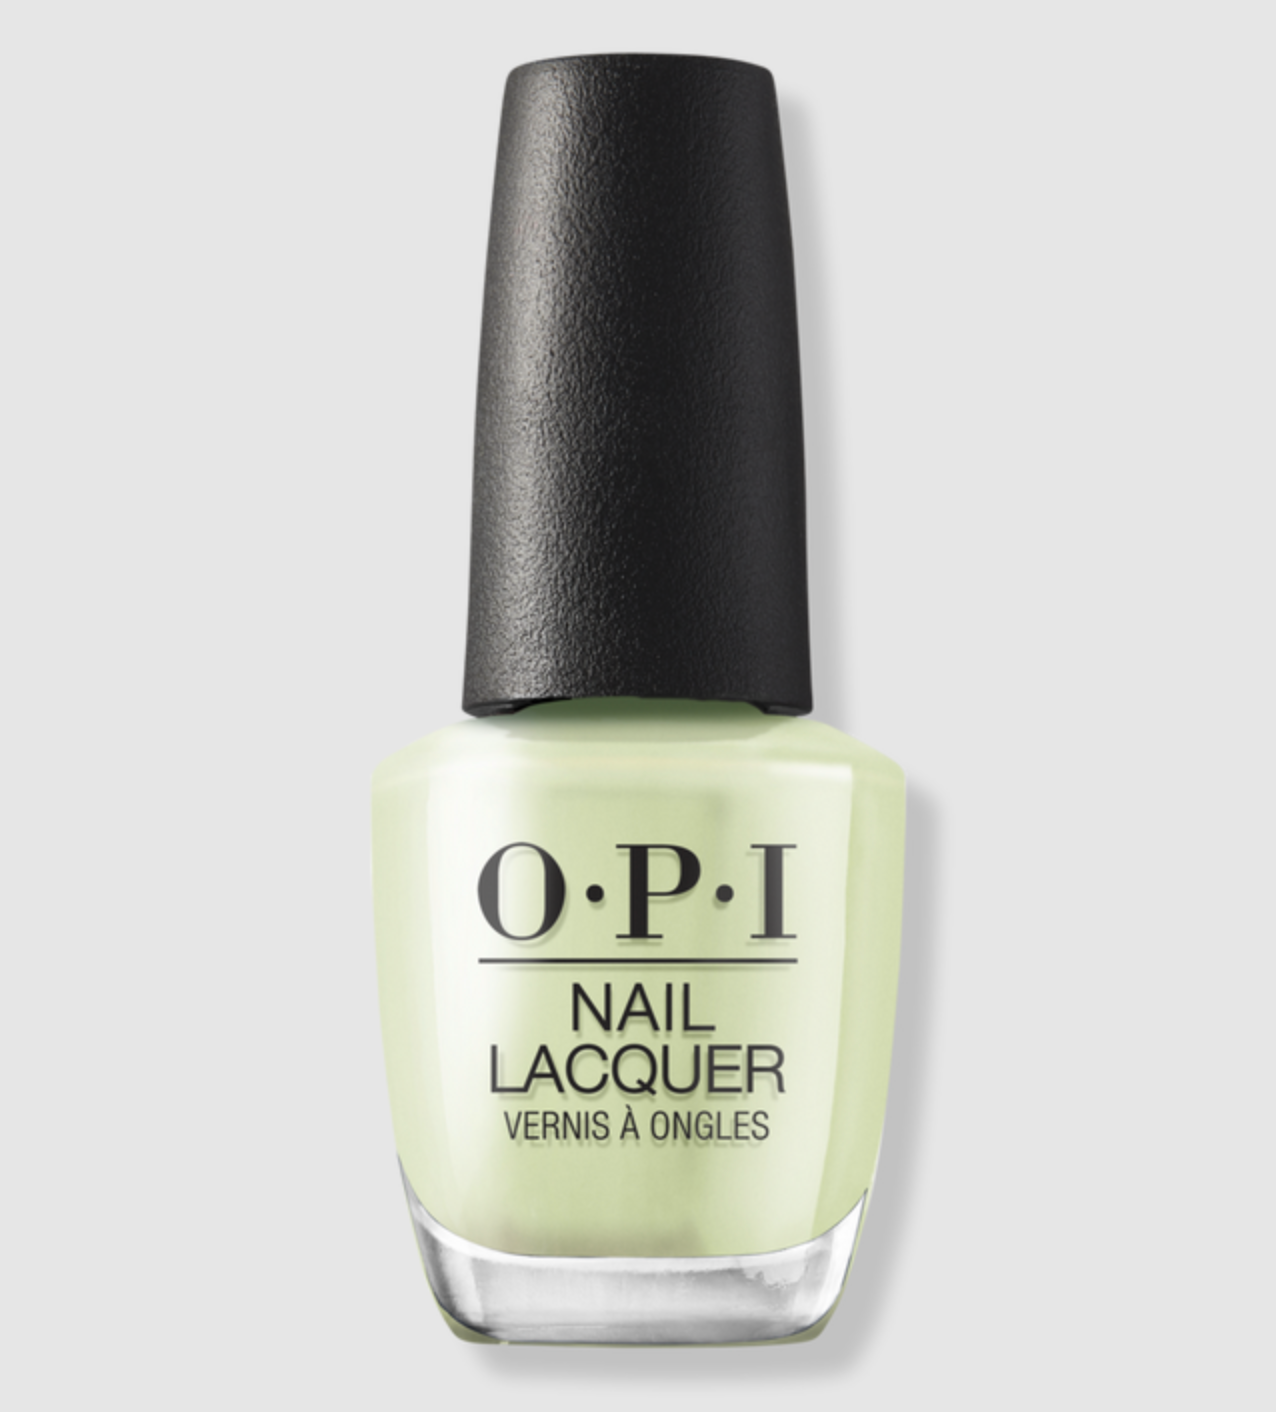 Nail Lacquer in The Pass is Always Greener